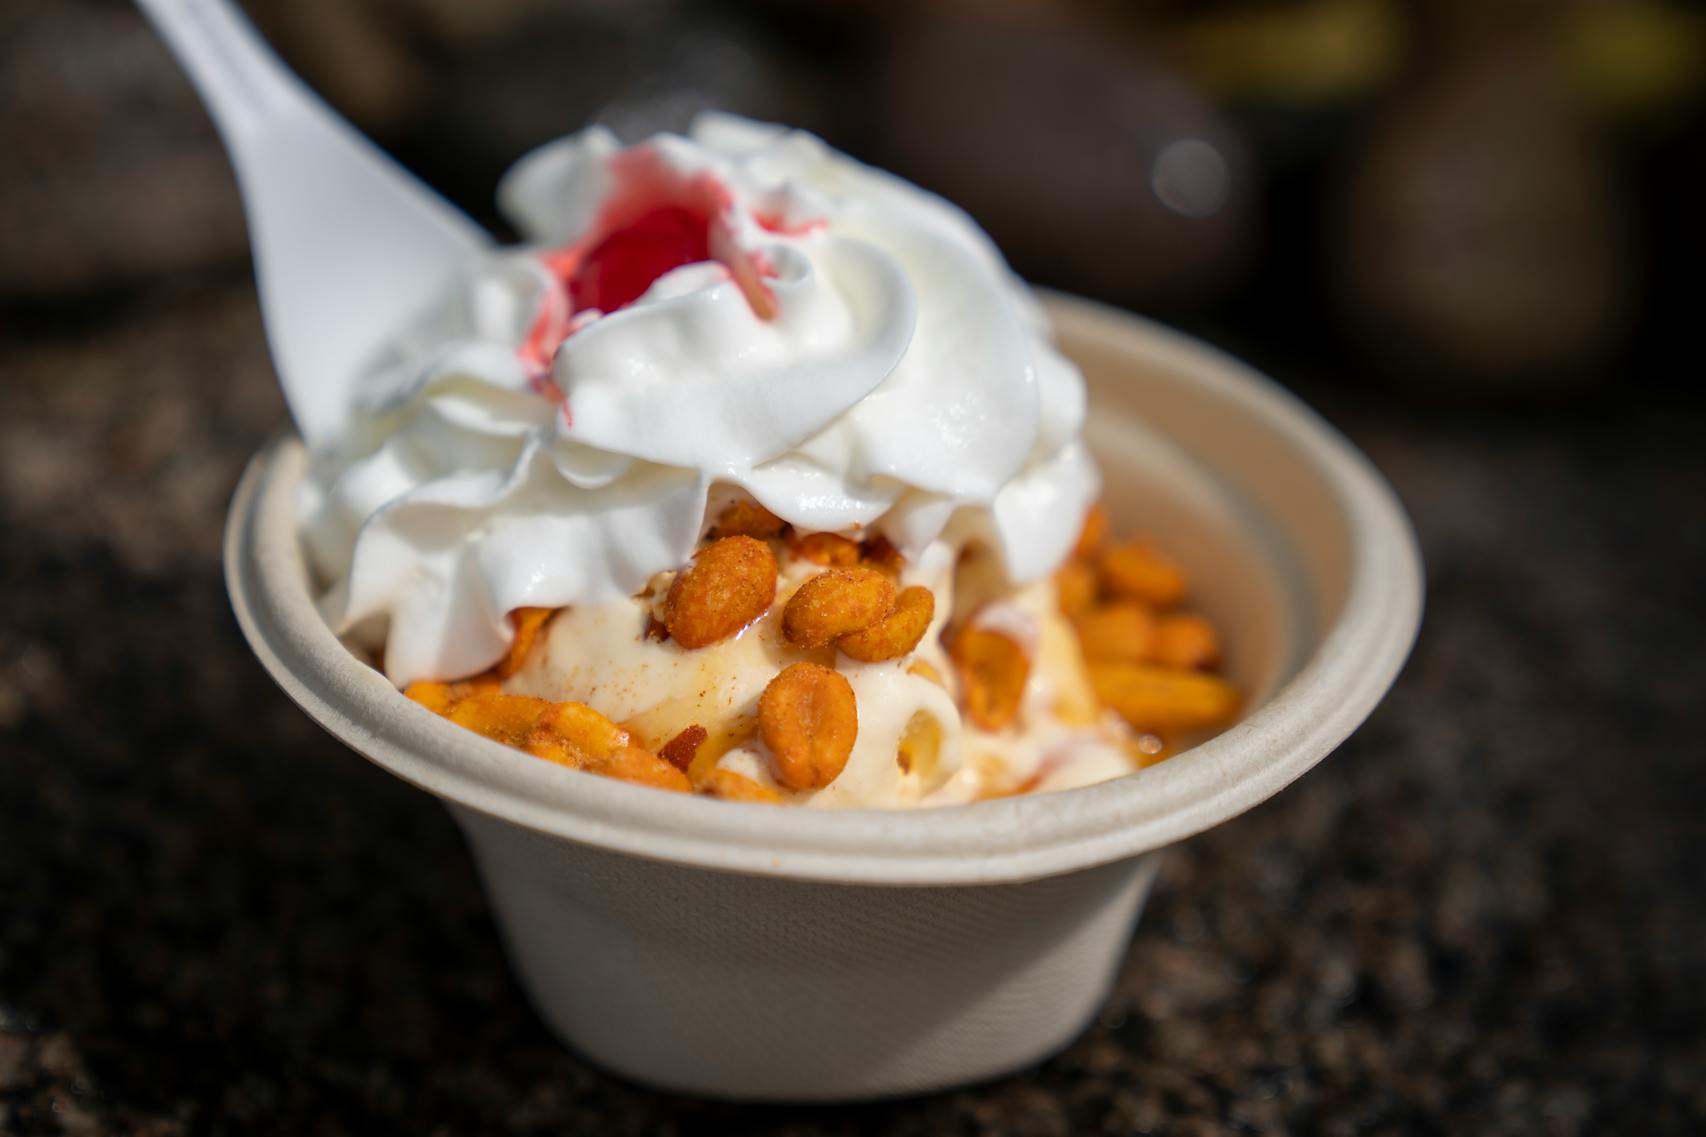 Bee Sting Sundae from Bridgemans. The new foods of the 2023 Minnesota State Fair photographed on the first day of the fair in Falcon Heights, Minn. on Tuesday, Aug. 8, 2023. ] LEILA NAVIDI • leila.navidi@startribune.com